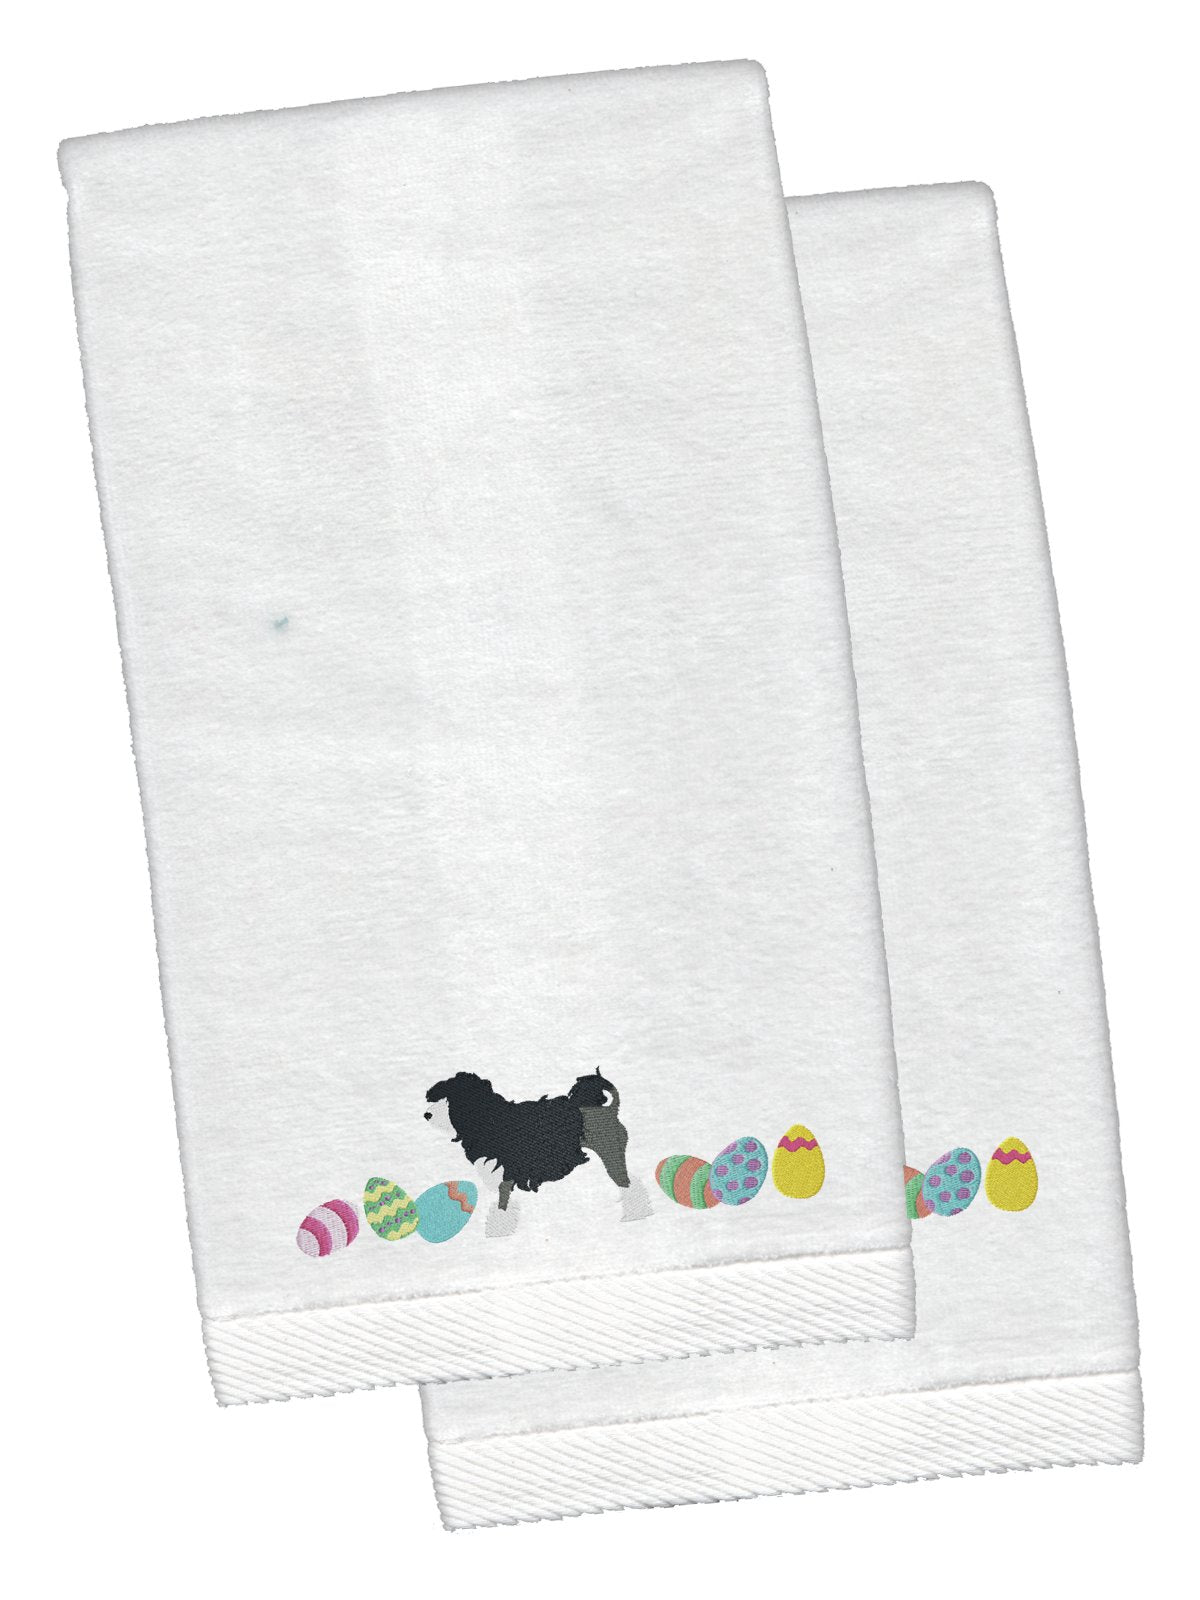 Lowchen Easter White Embroidered Plush Hand Towel Set of 2 CK1662KTEMB by Caroline's Treasures